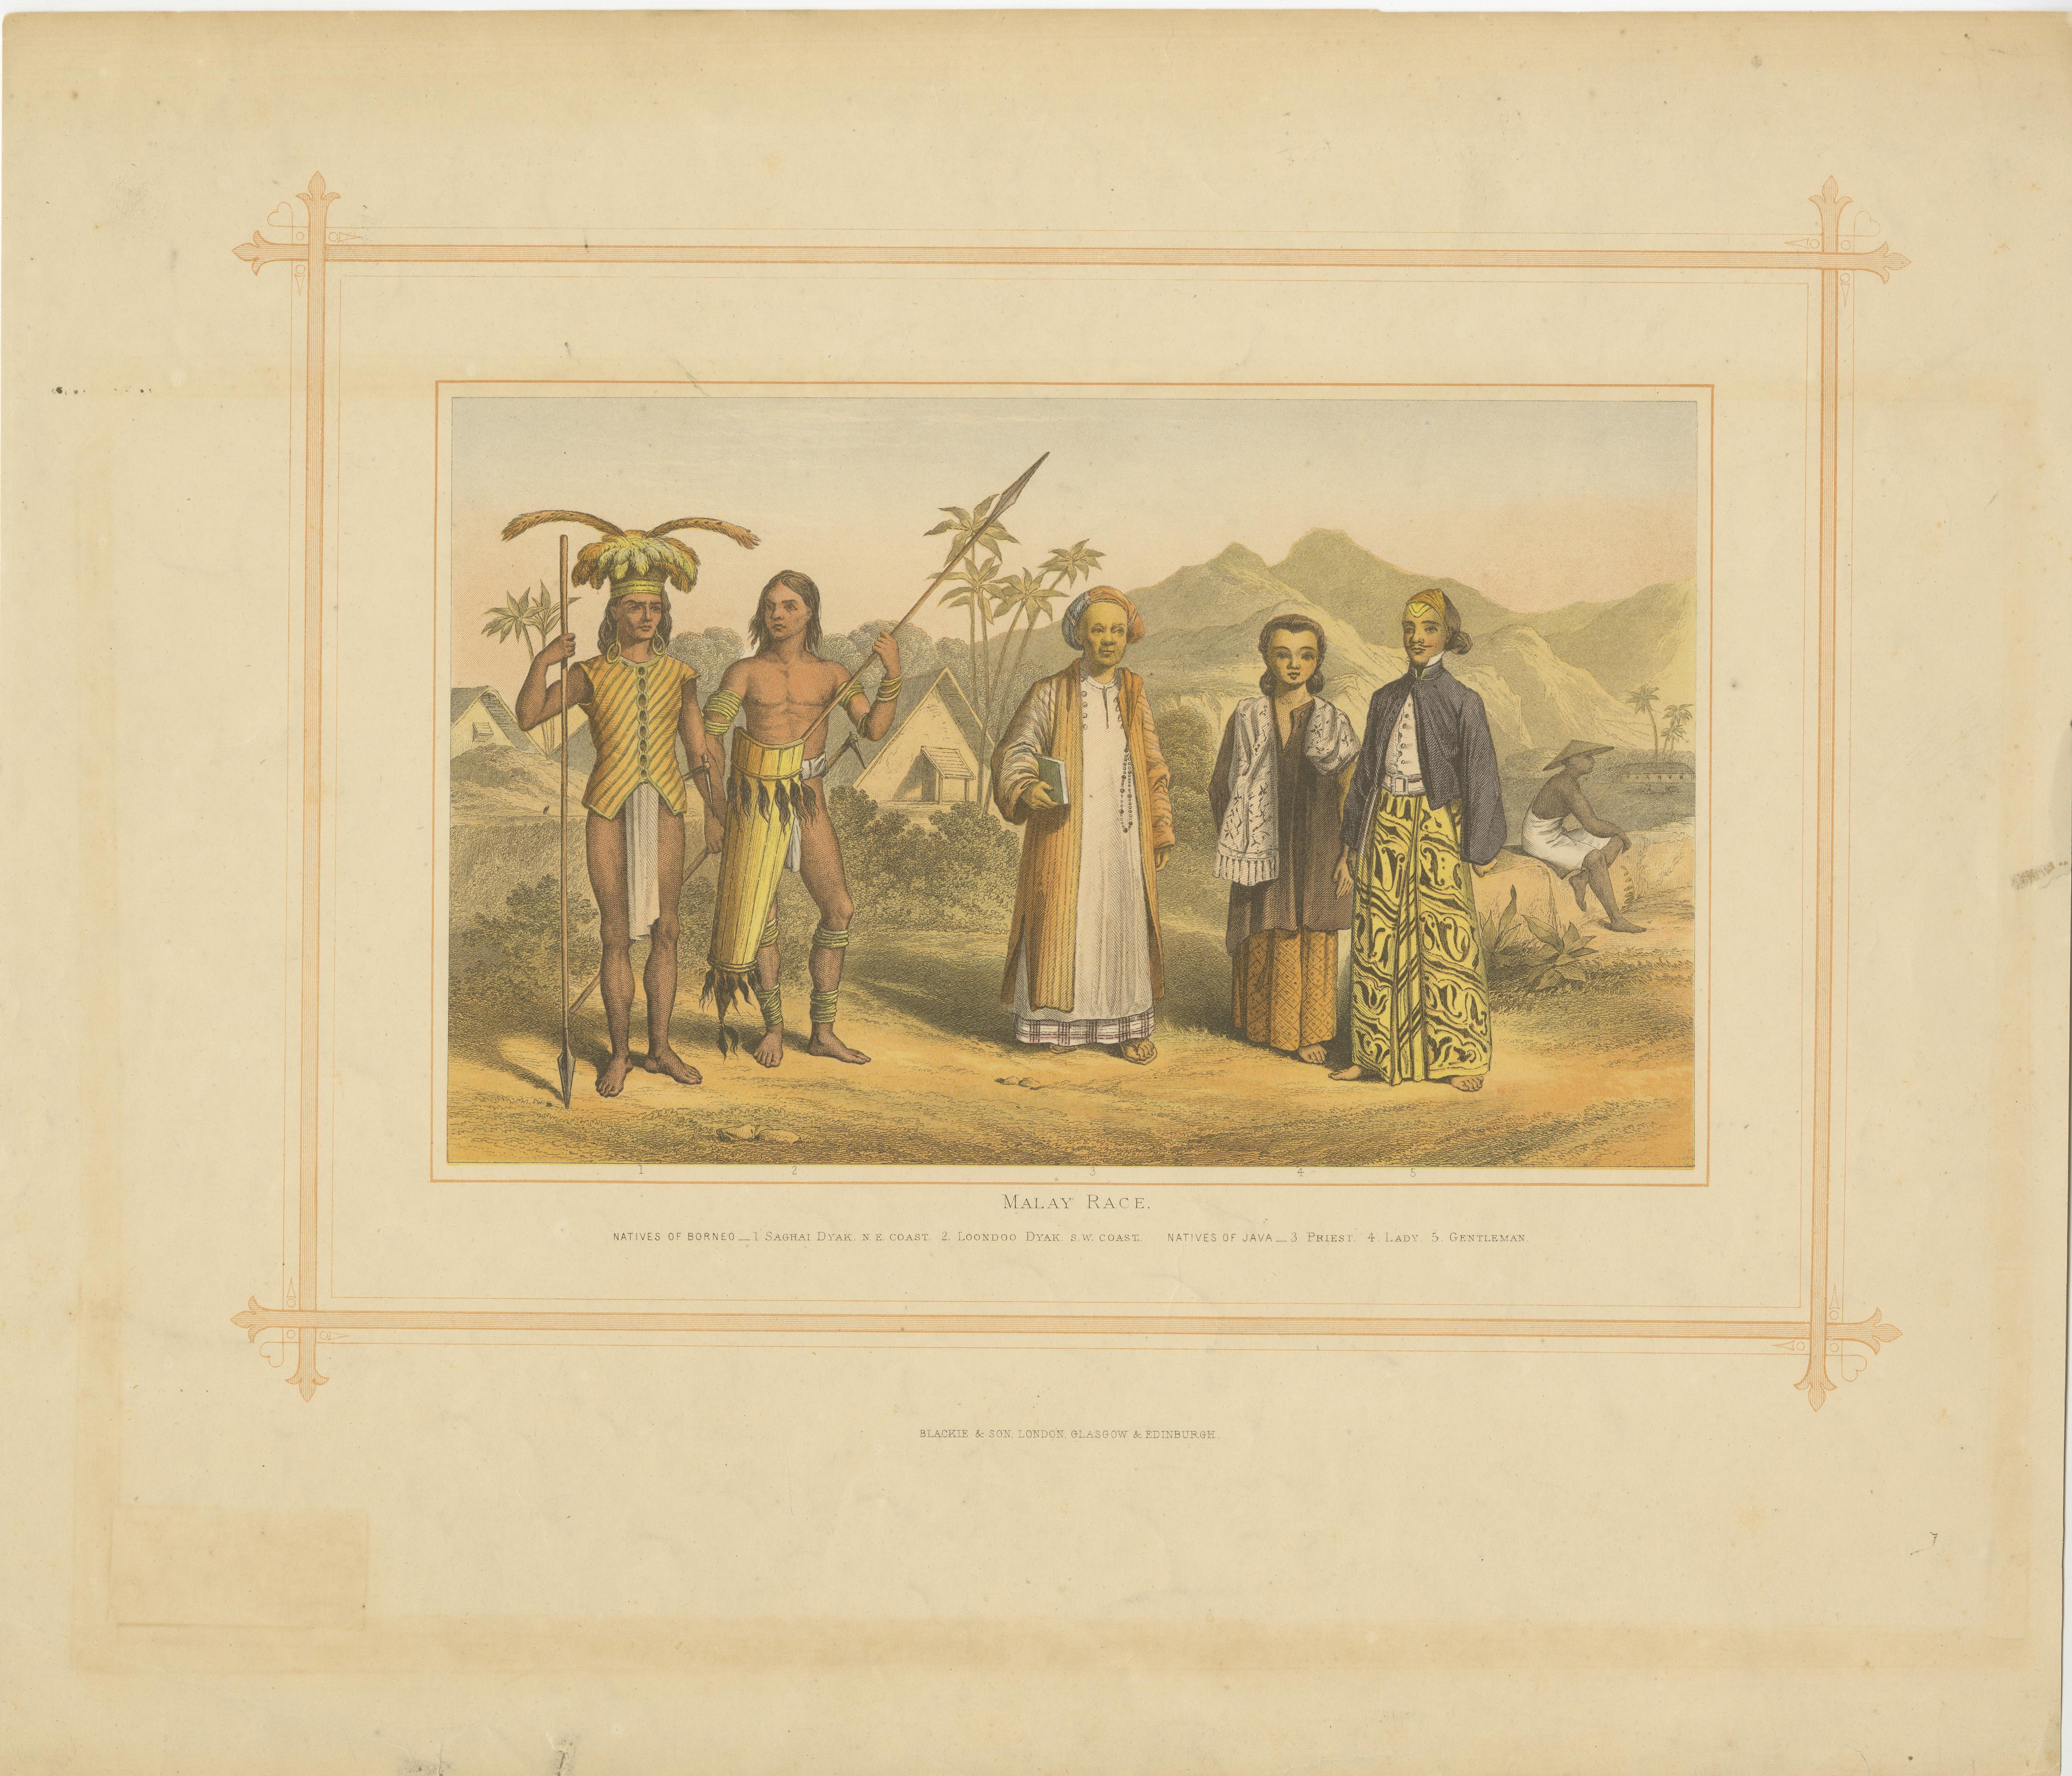 Antique print titled 'Malay Race'. Original old print of natives of Borneo: 1. Saghai Dyak. N.E. Coast. 2. Loondoo Dyak. S.W. Coast. Natives of Java: 3. priest. 4th Lady. 5th Gentleman. This print originates from 'The Comprehensive Atlas & Geography